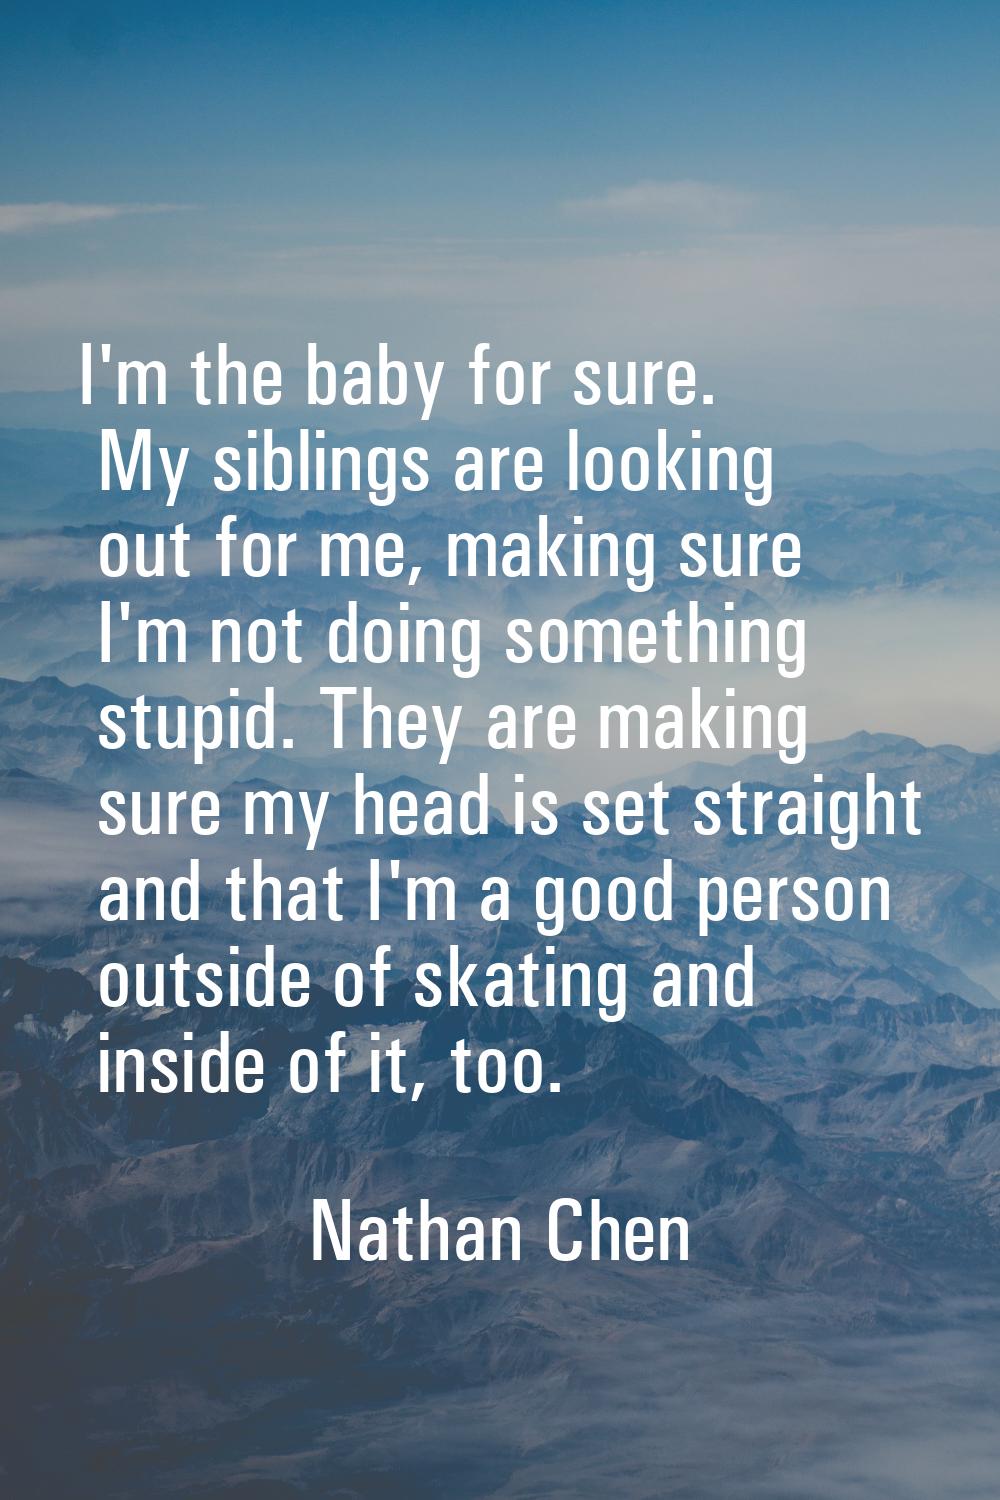 I'm the baby for sure. My siblings are looking out for me, making sure I'm not doing something stup